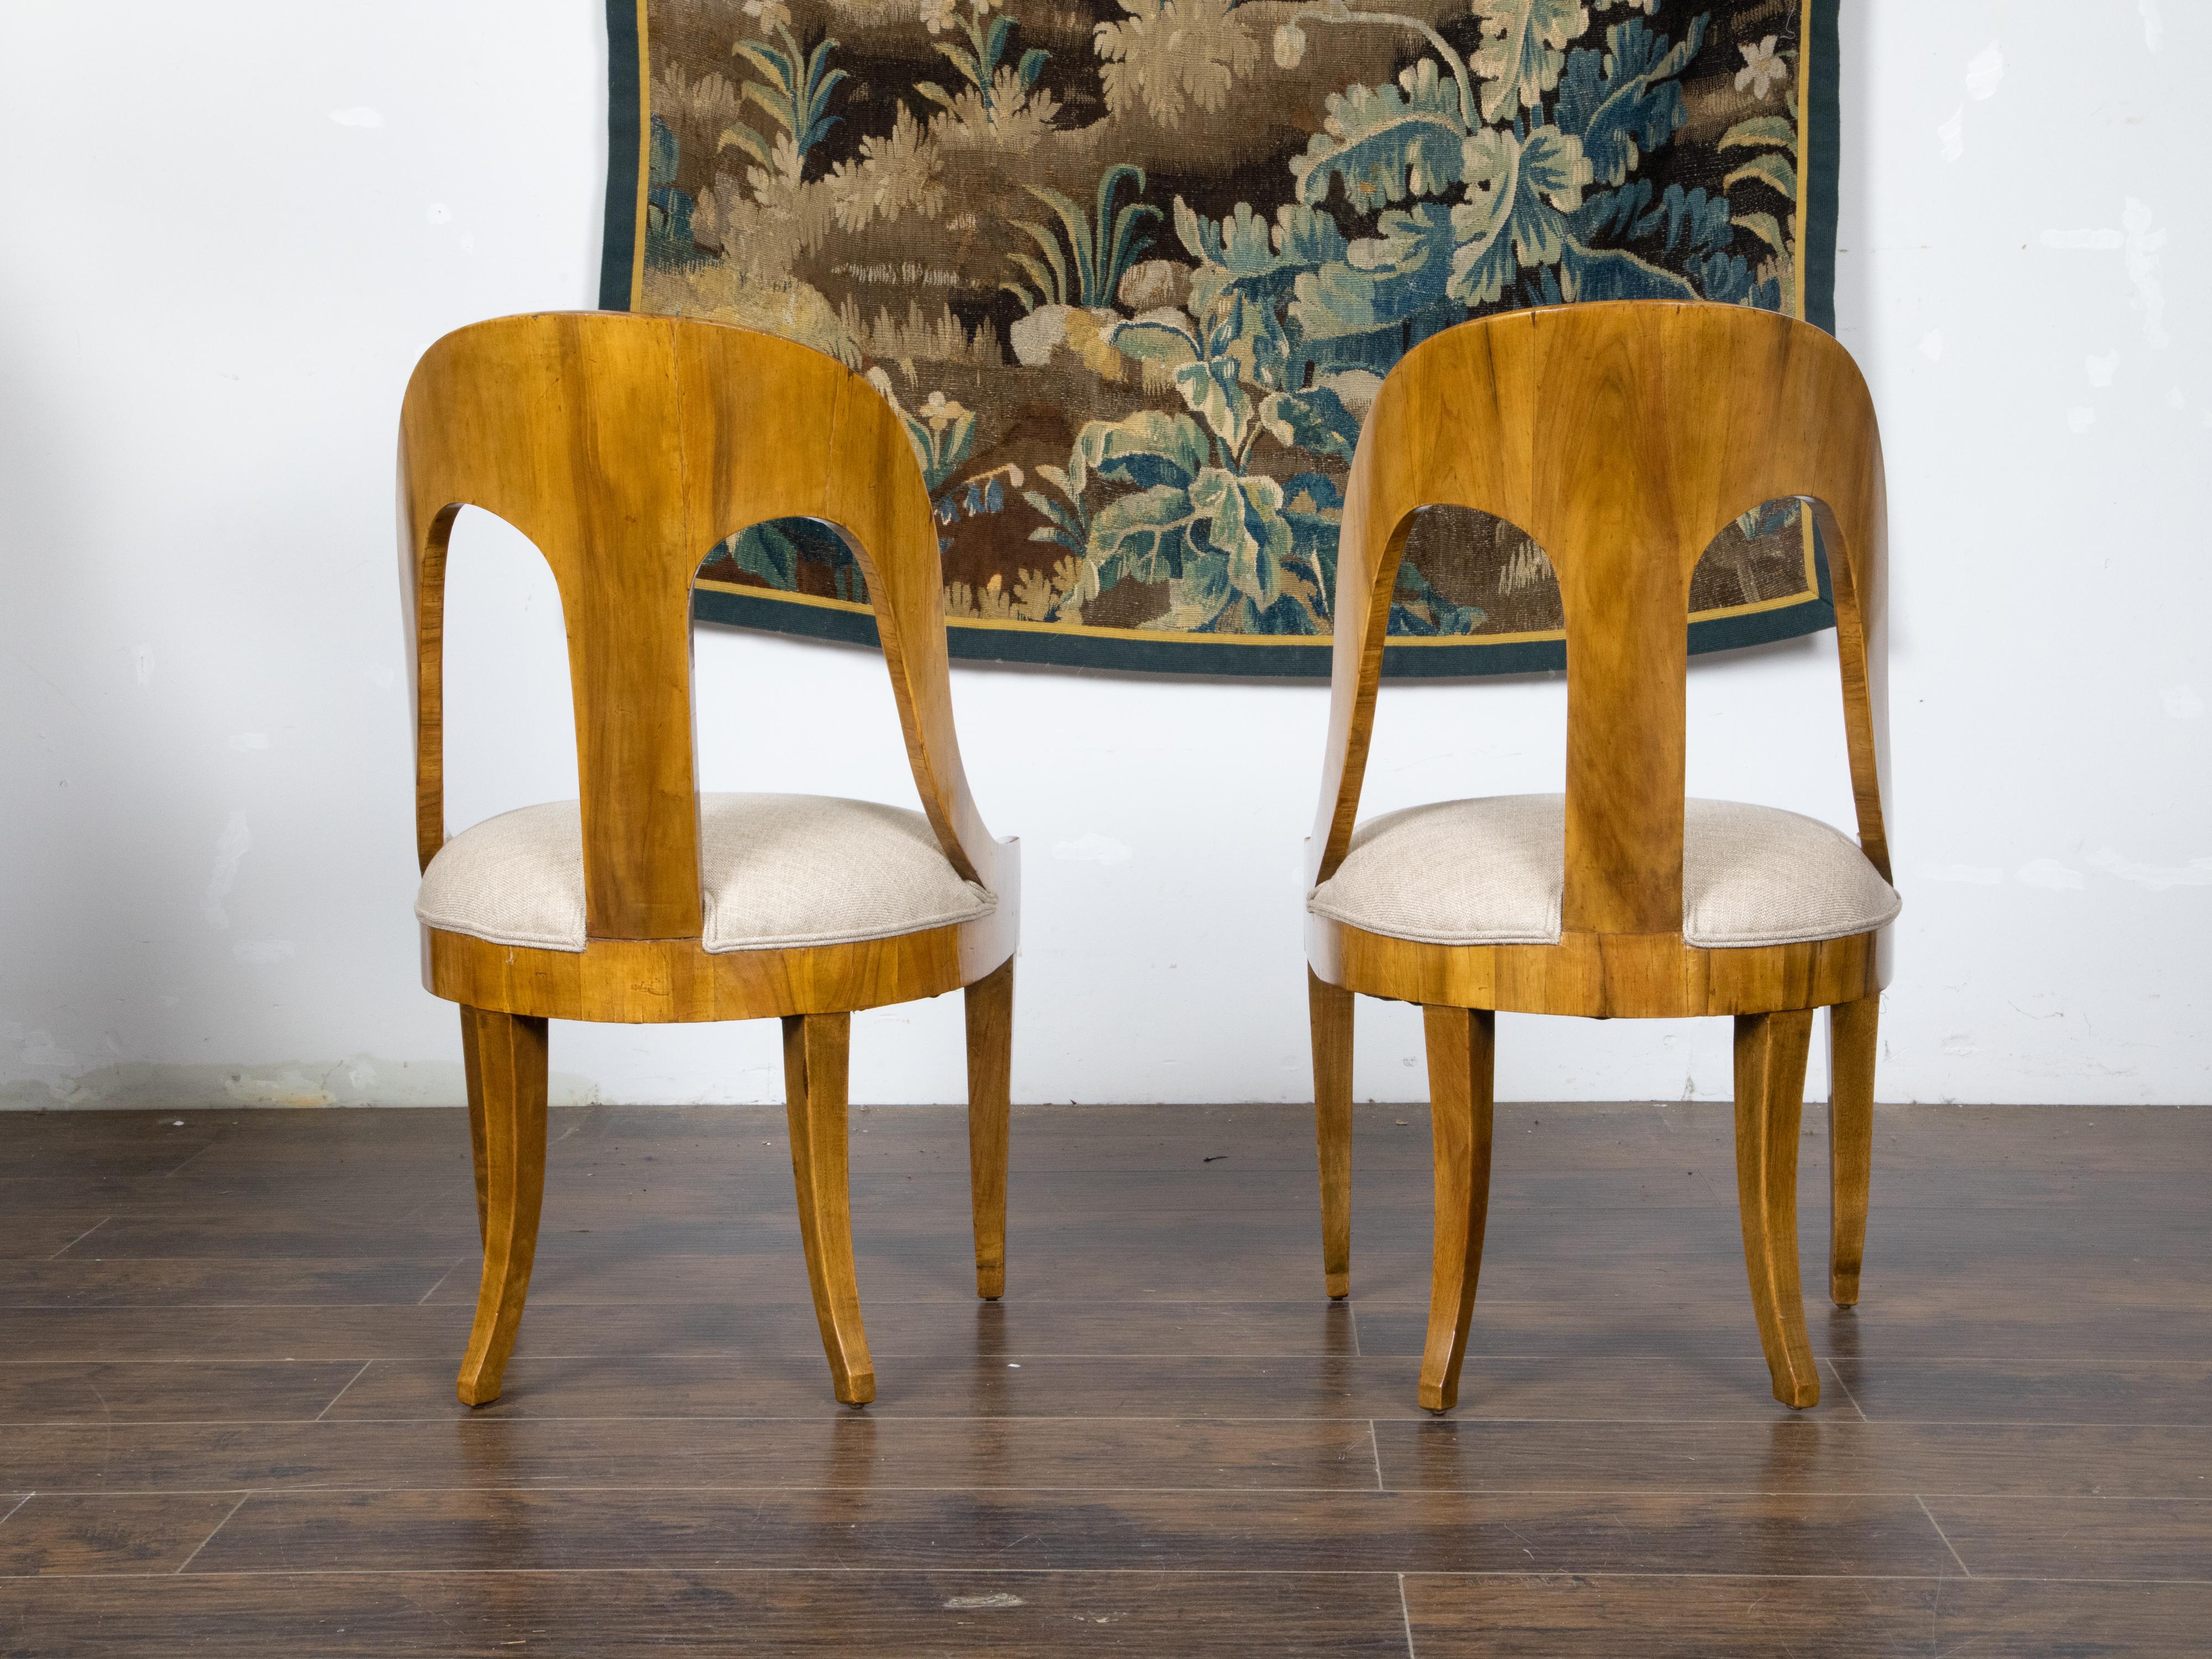 20th Century Pair of Biedermeier Style 1900s Walnut Spoon Back Chairs with New Upholstery